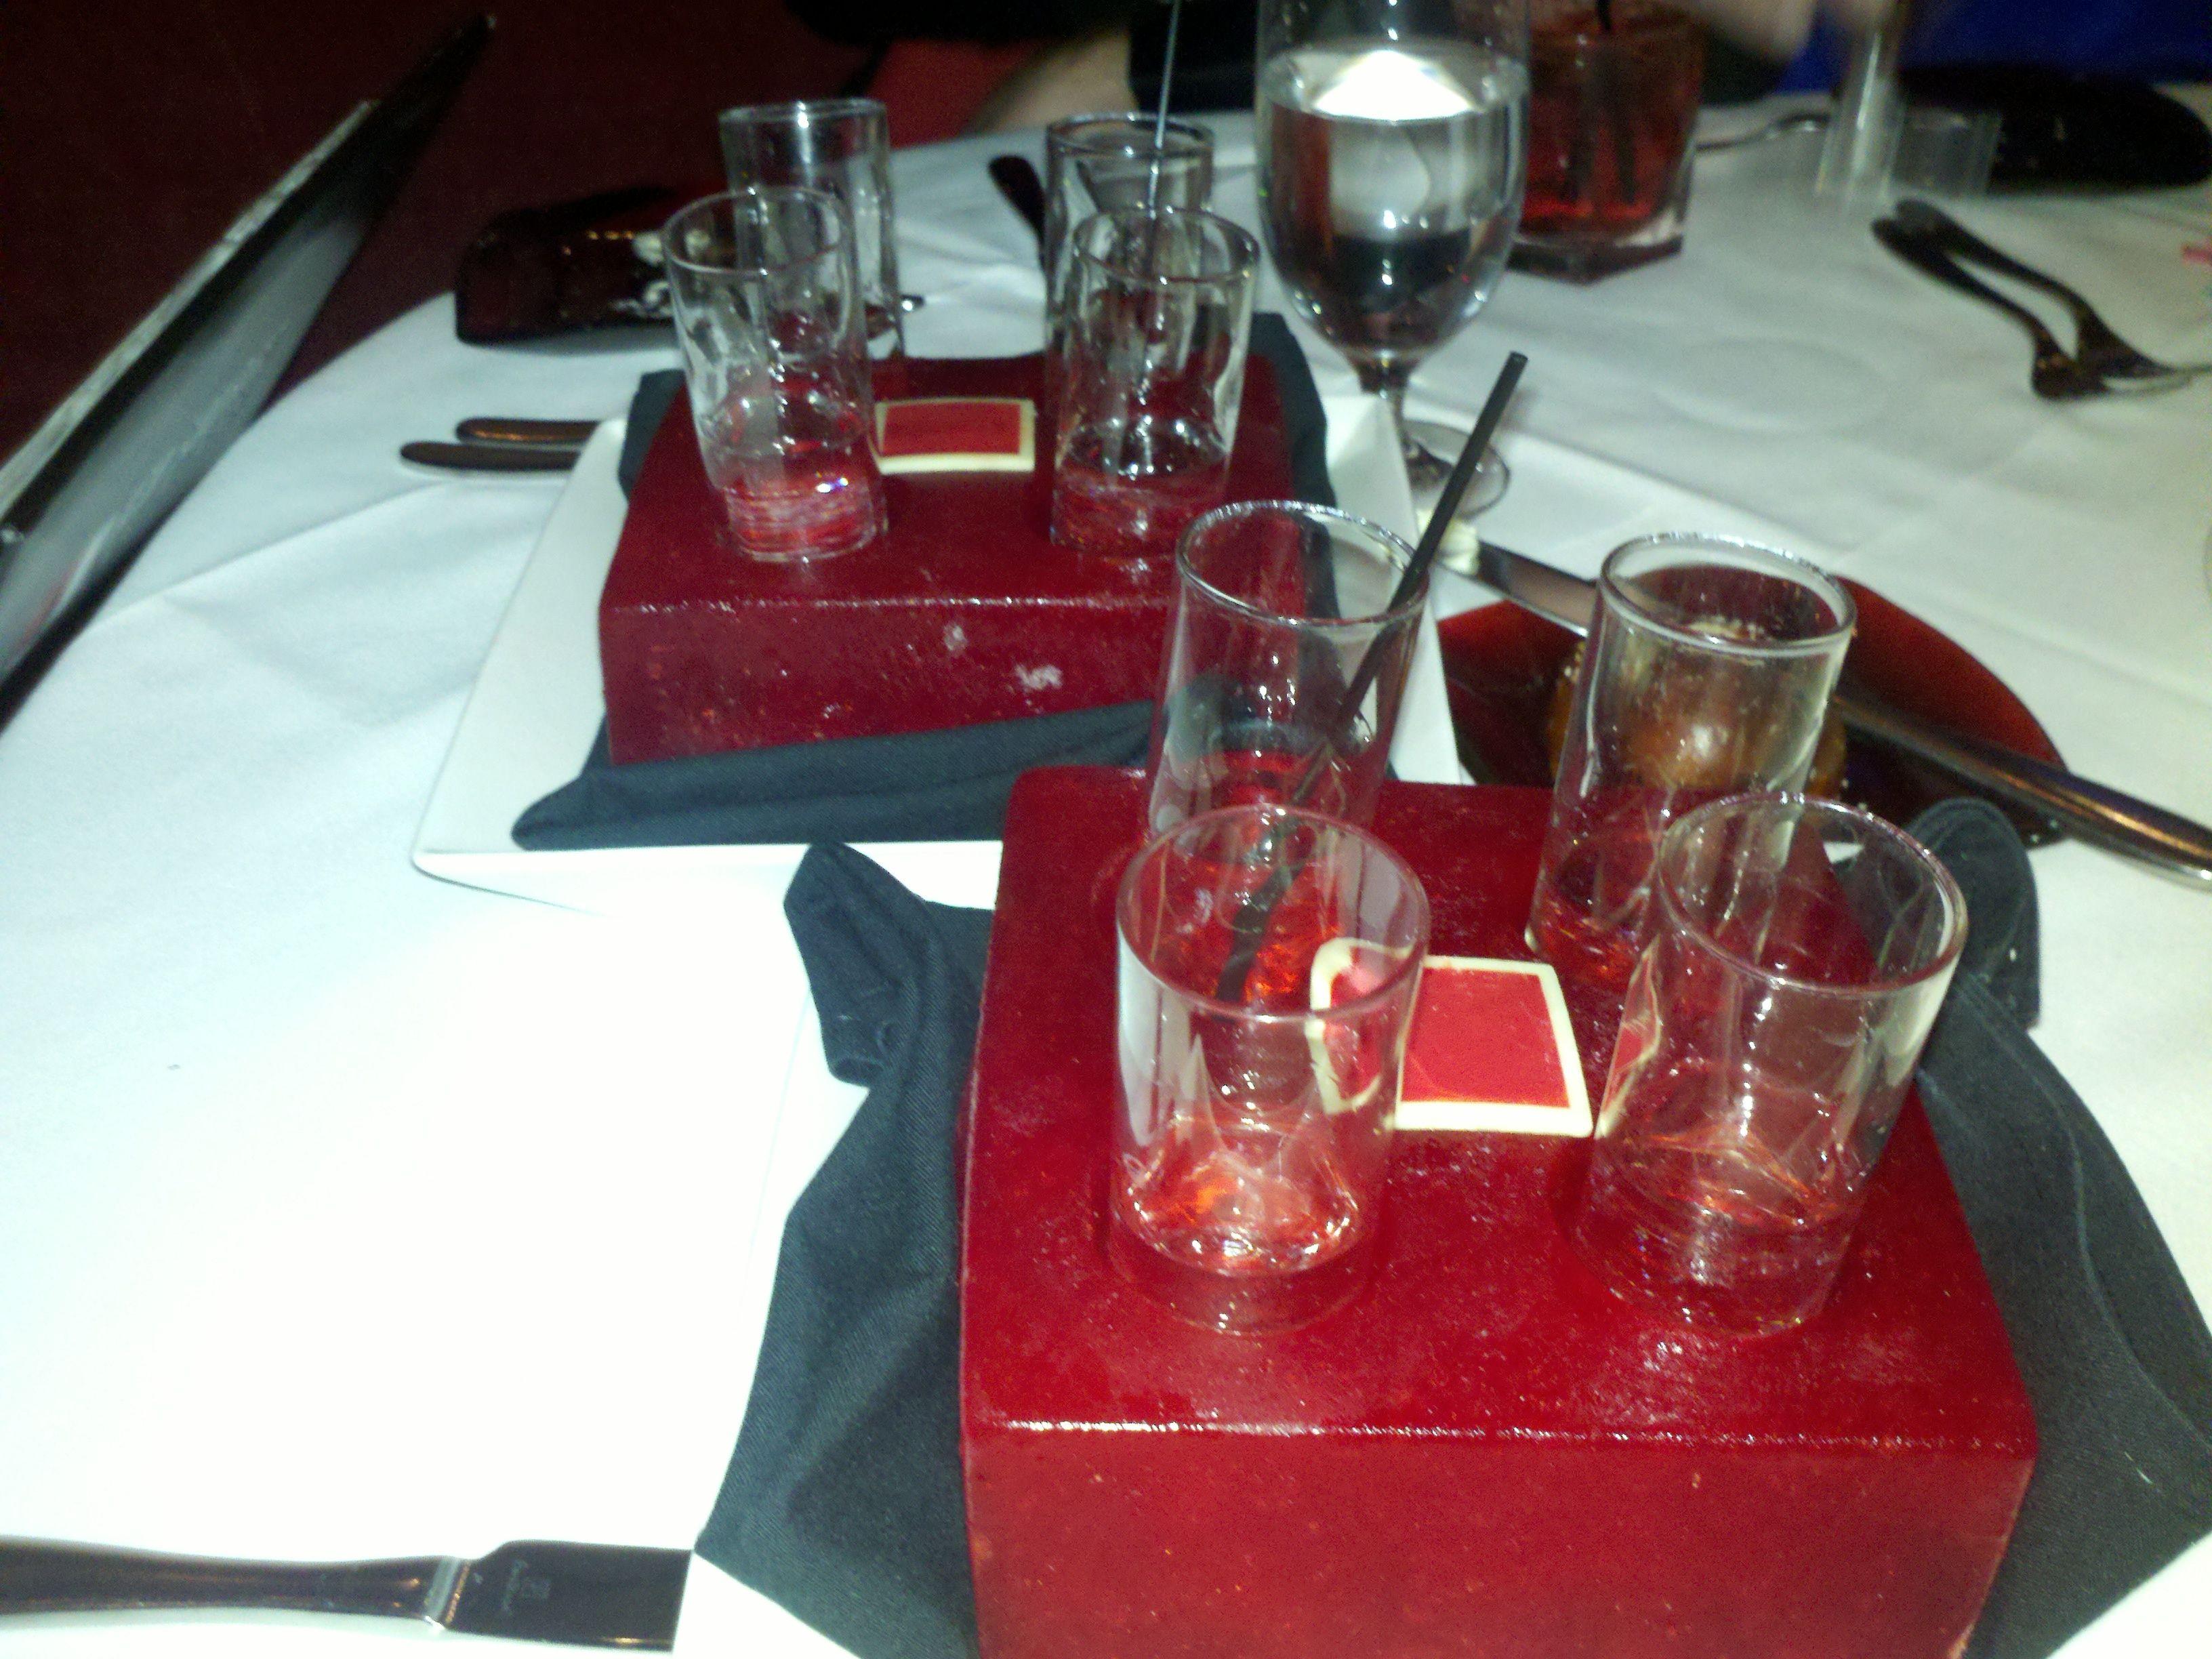 Red Square Las Vegas Logo - Nostrovia! Vodka flights at Red Square | All is Yar